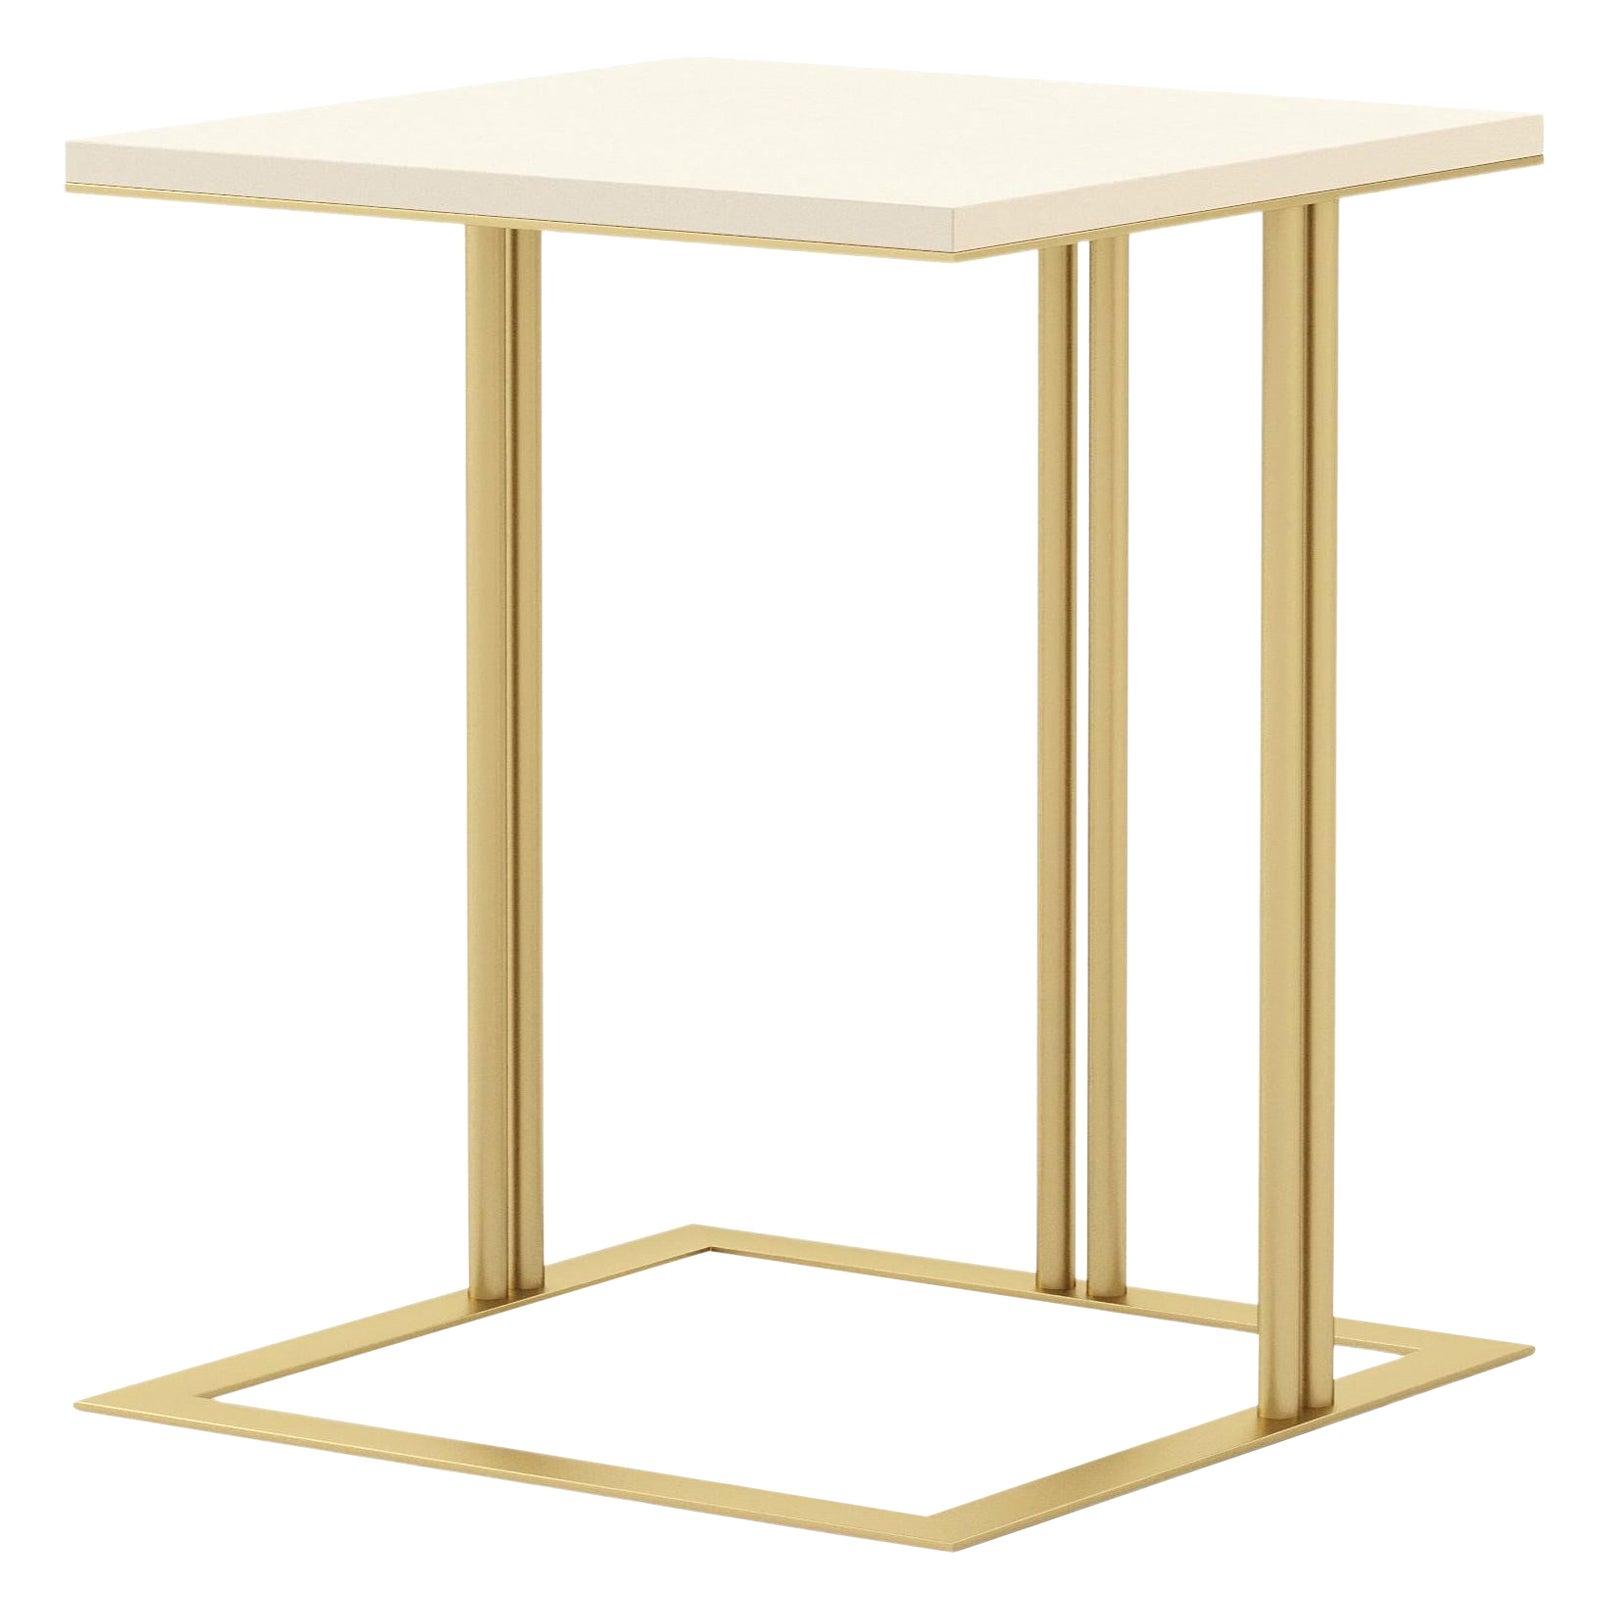 Modern Louise Side Table made with lacquer and brass, Handmade by Stylish Club For Sale